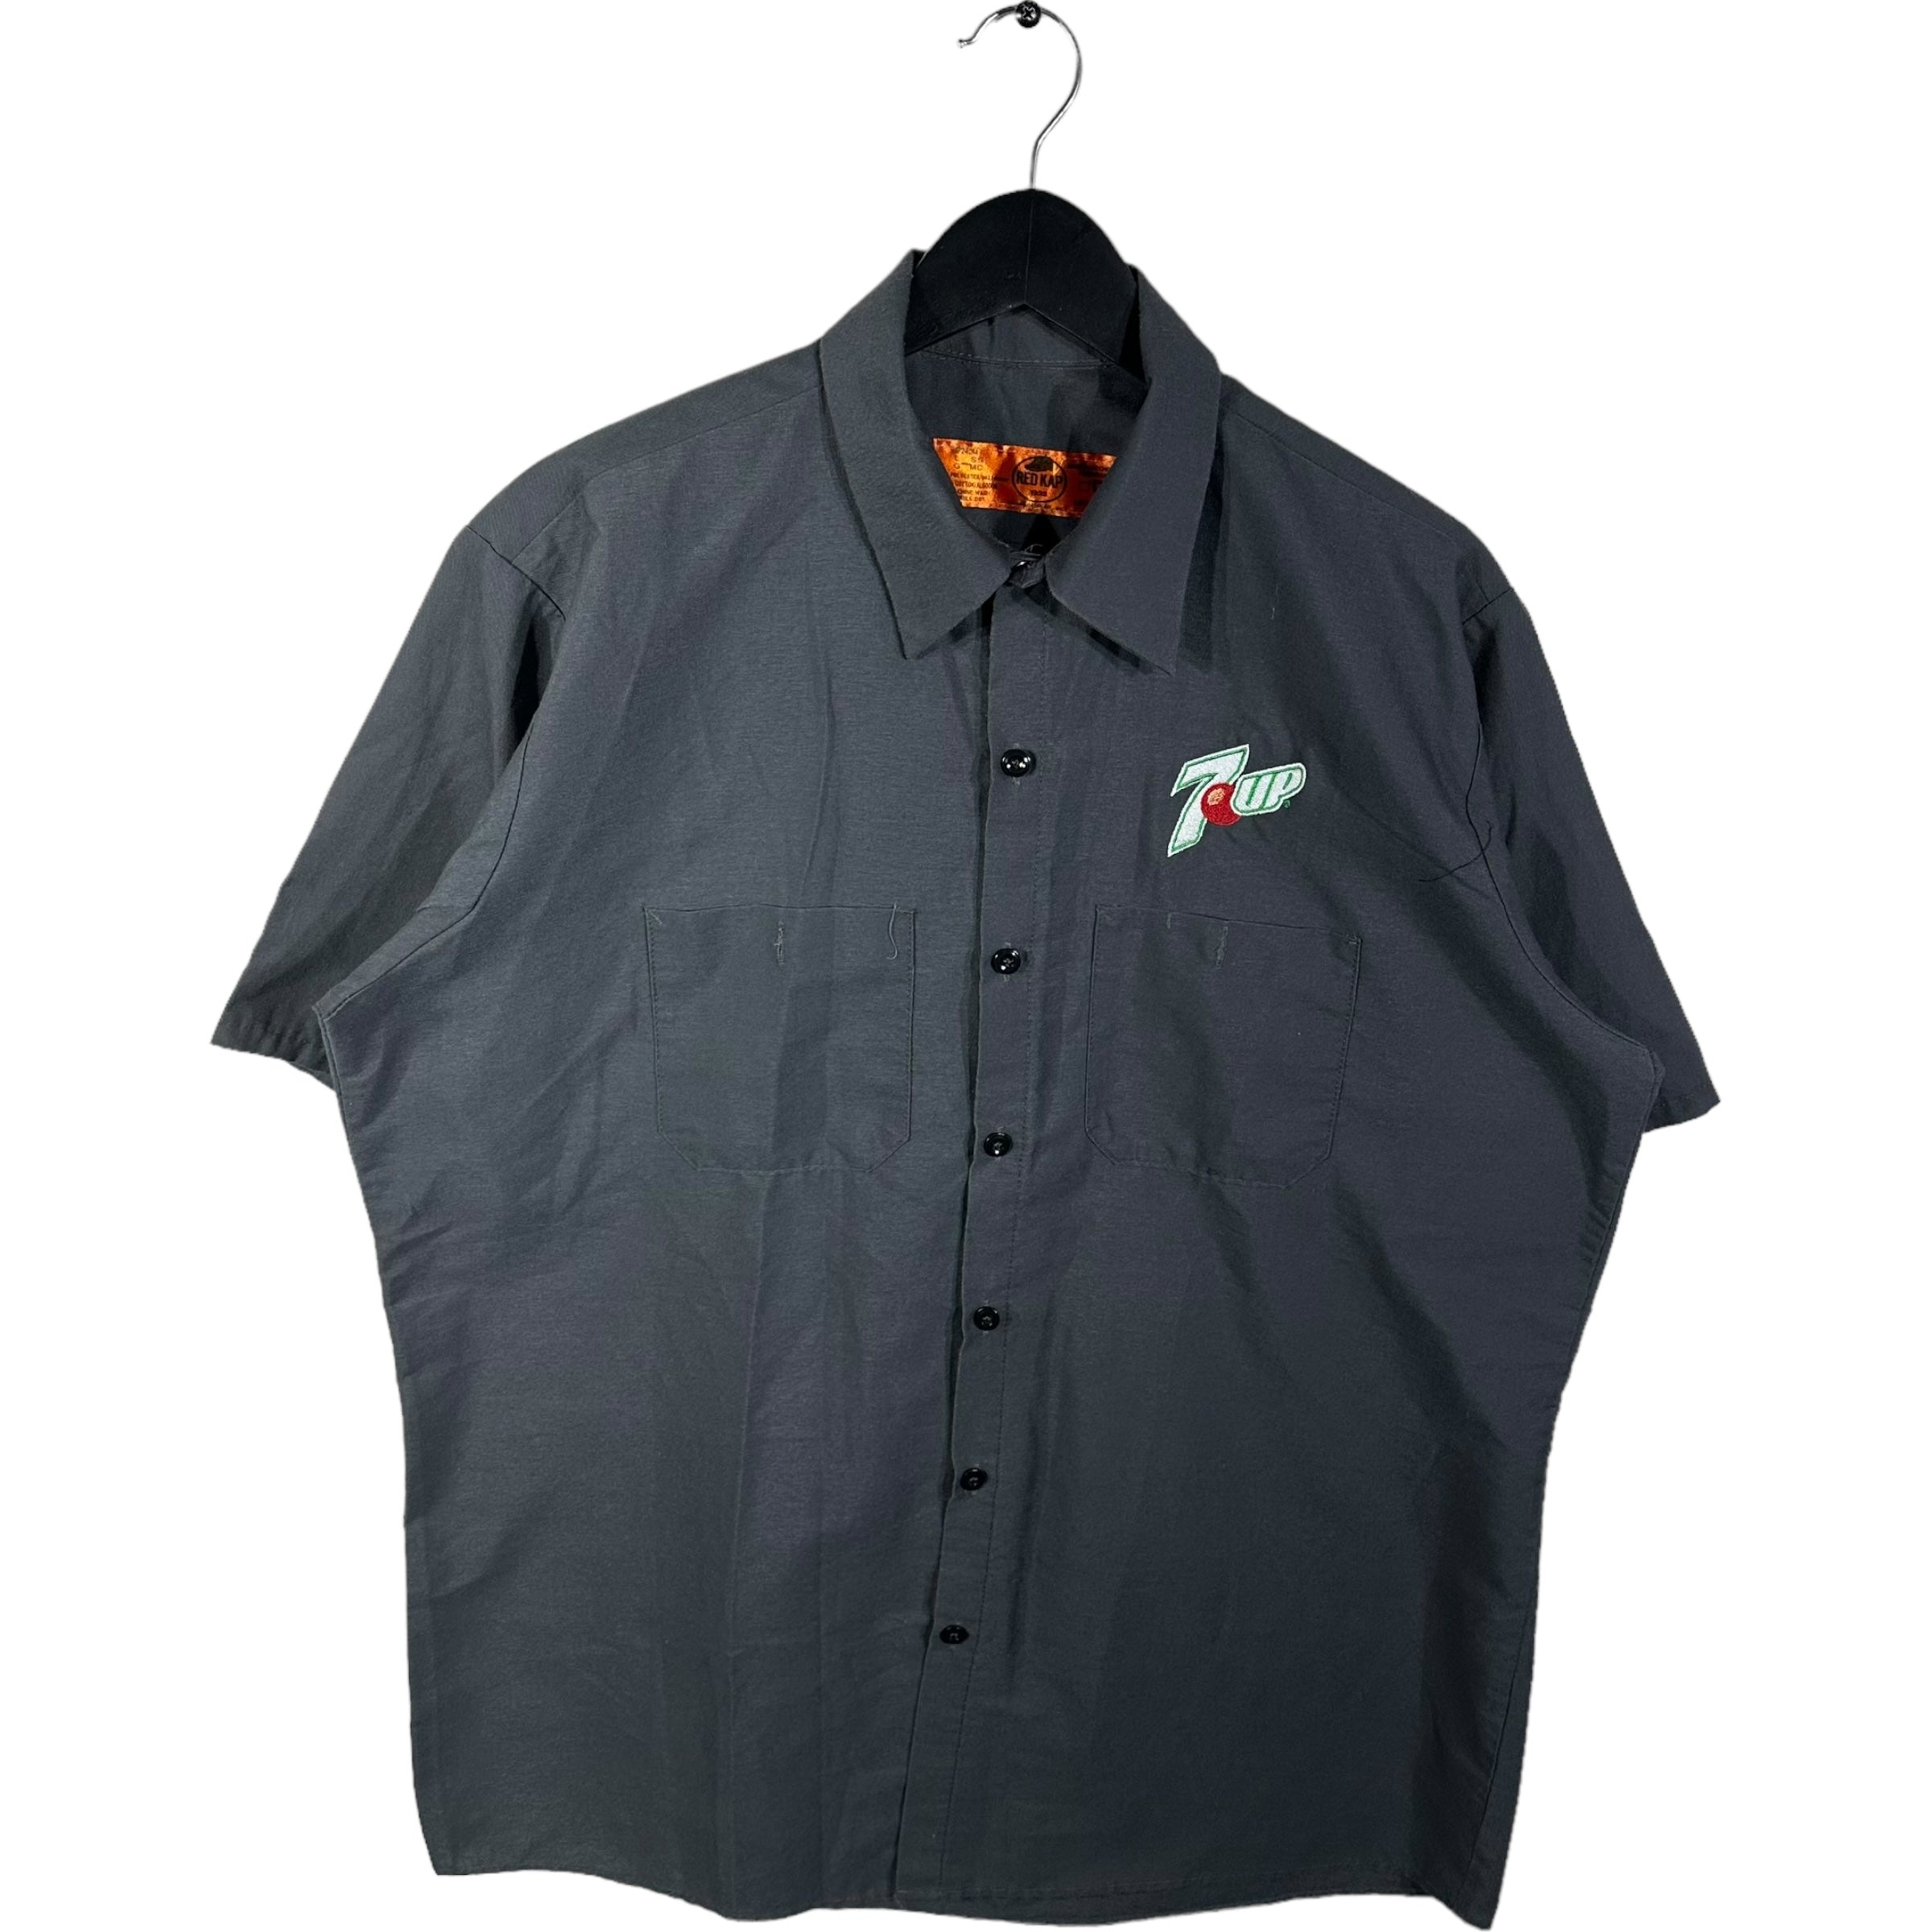 Vintage 7 Up Embroidered Short Sleeve Button Up